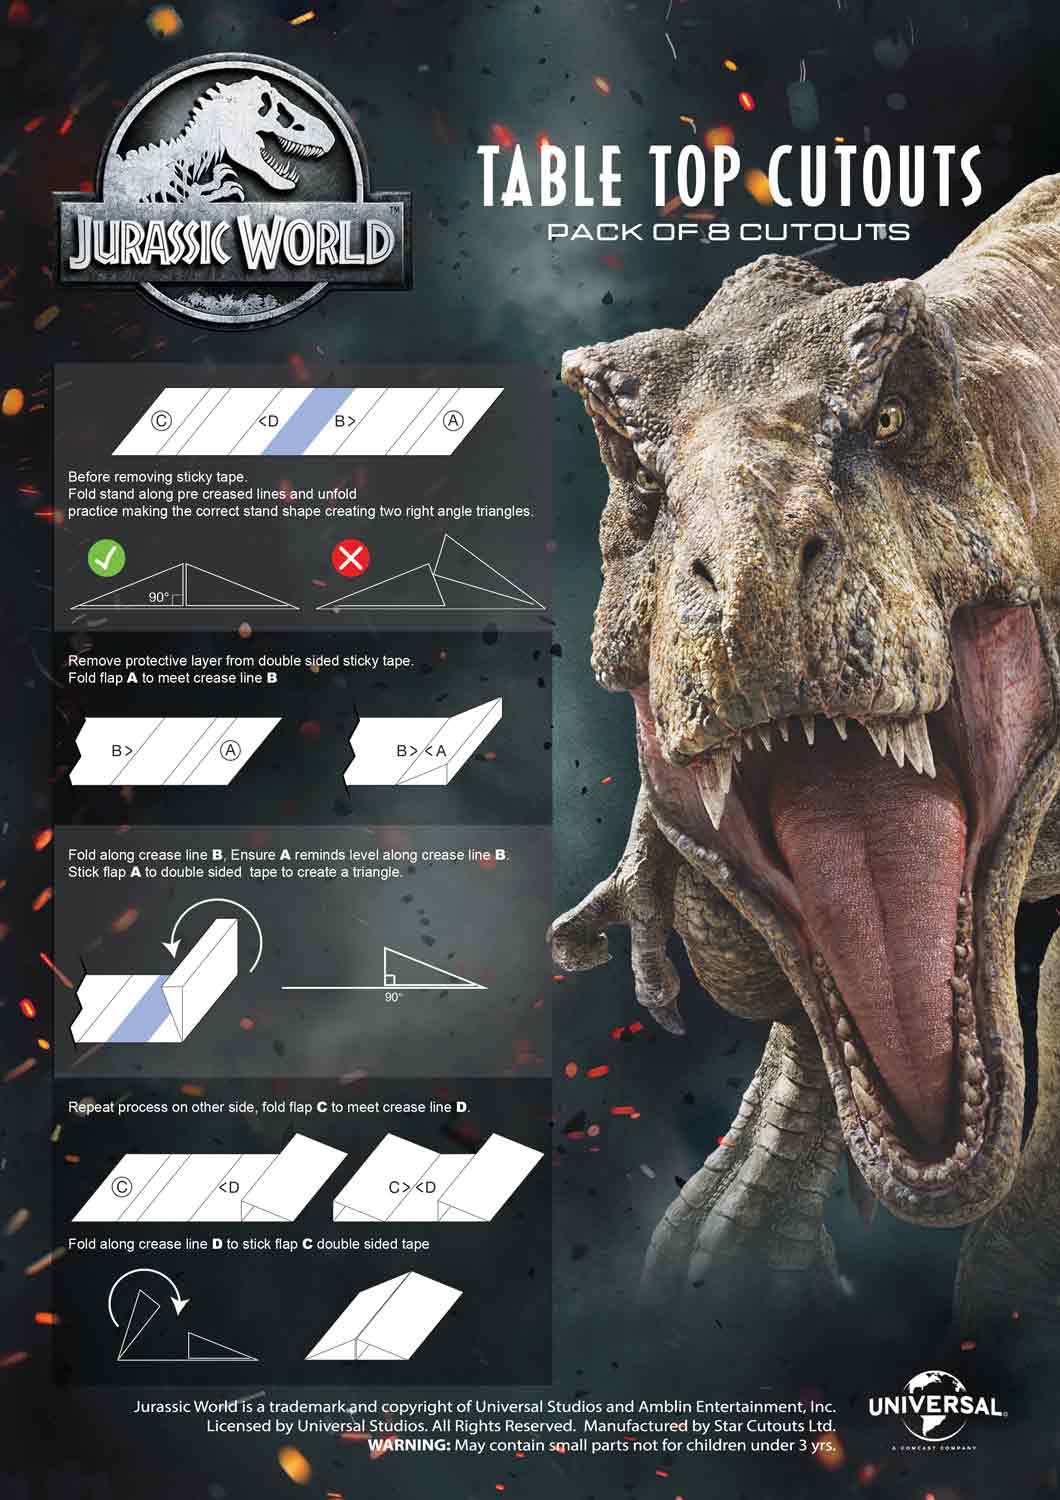 TT009 Jurassic World Dino's Table Topper Pack (8 cut-outs)